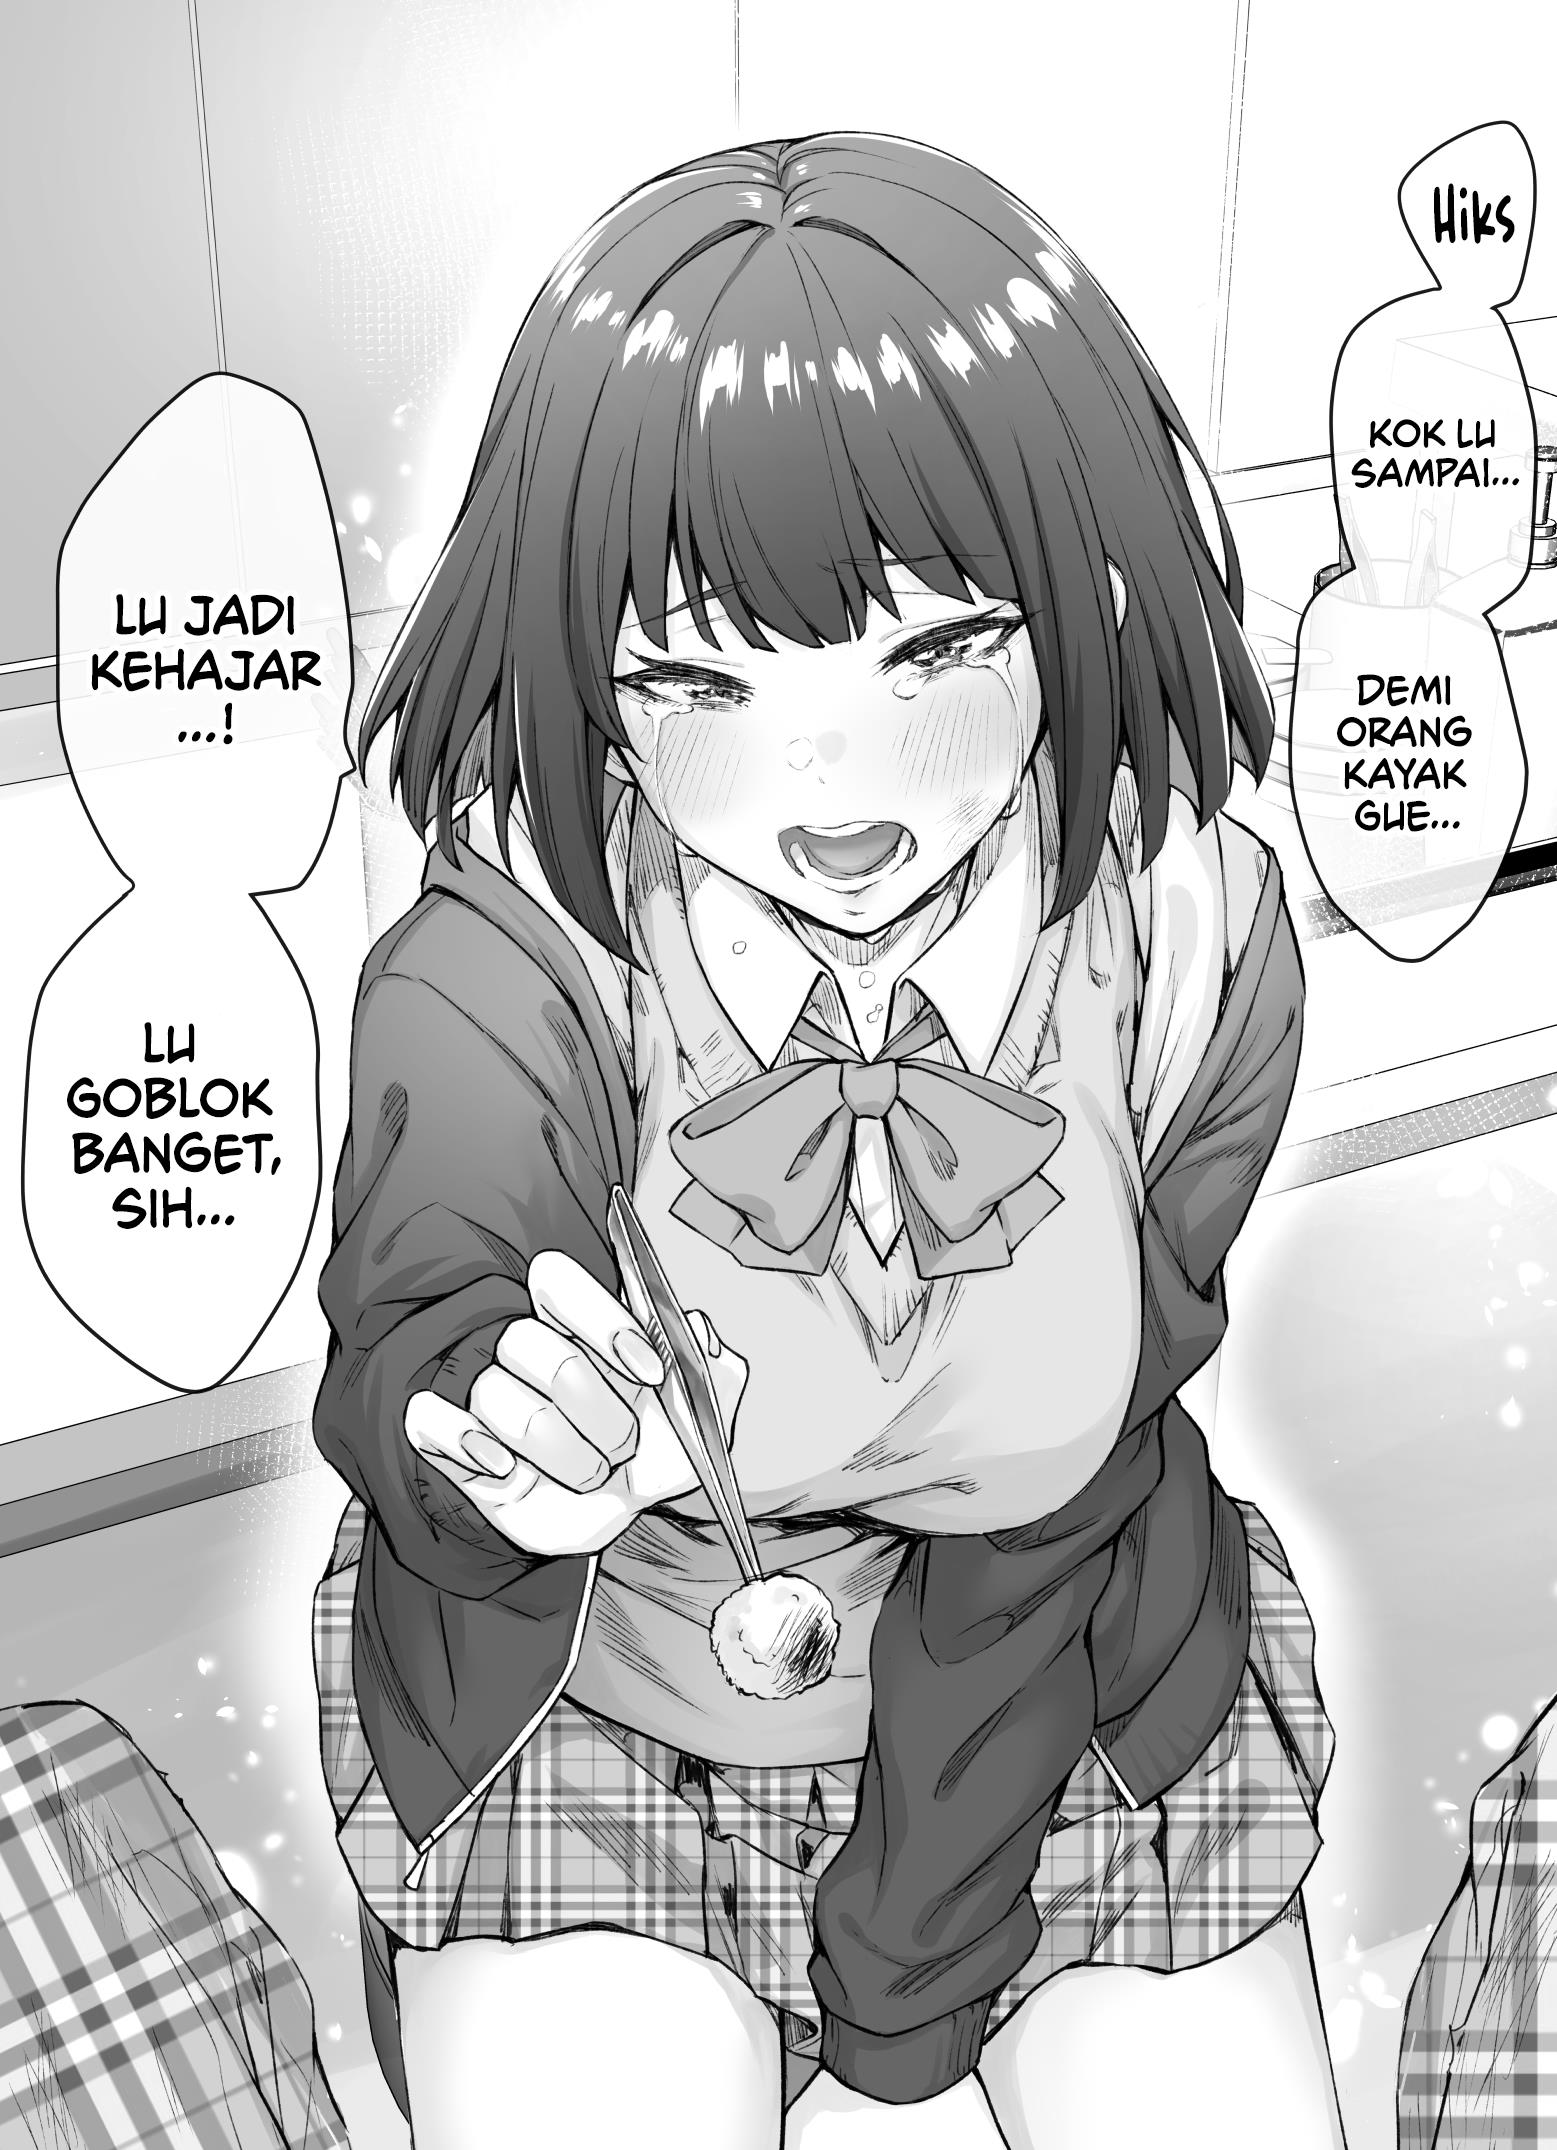 The Tsuntsuntsuntsuntsuntsun tsuntsuntsuntsuntsundere Girl Getting Less and Less Tsun Day by Day Chapter 11.2